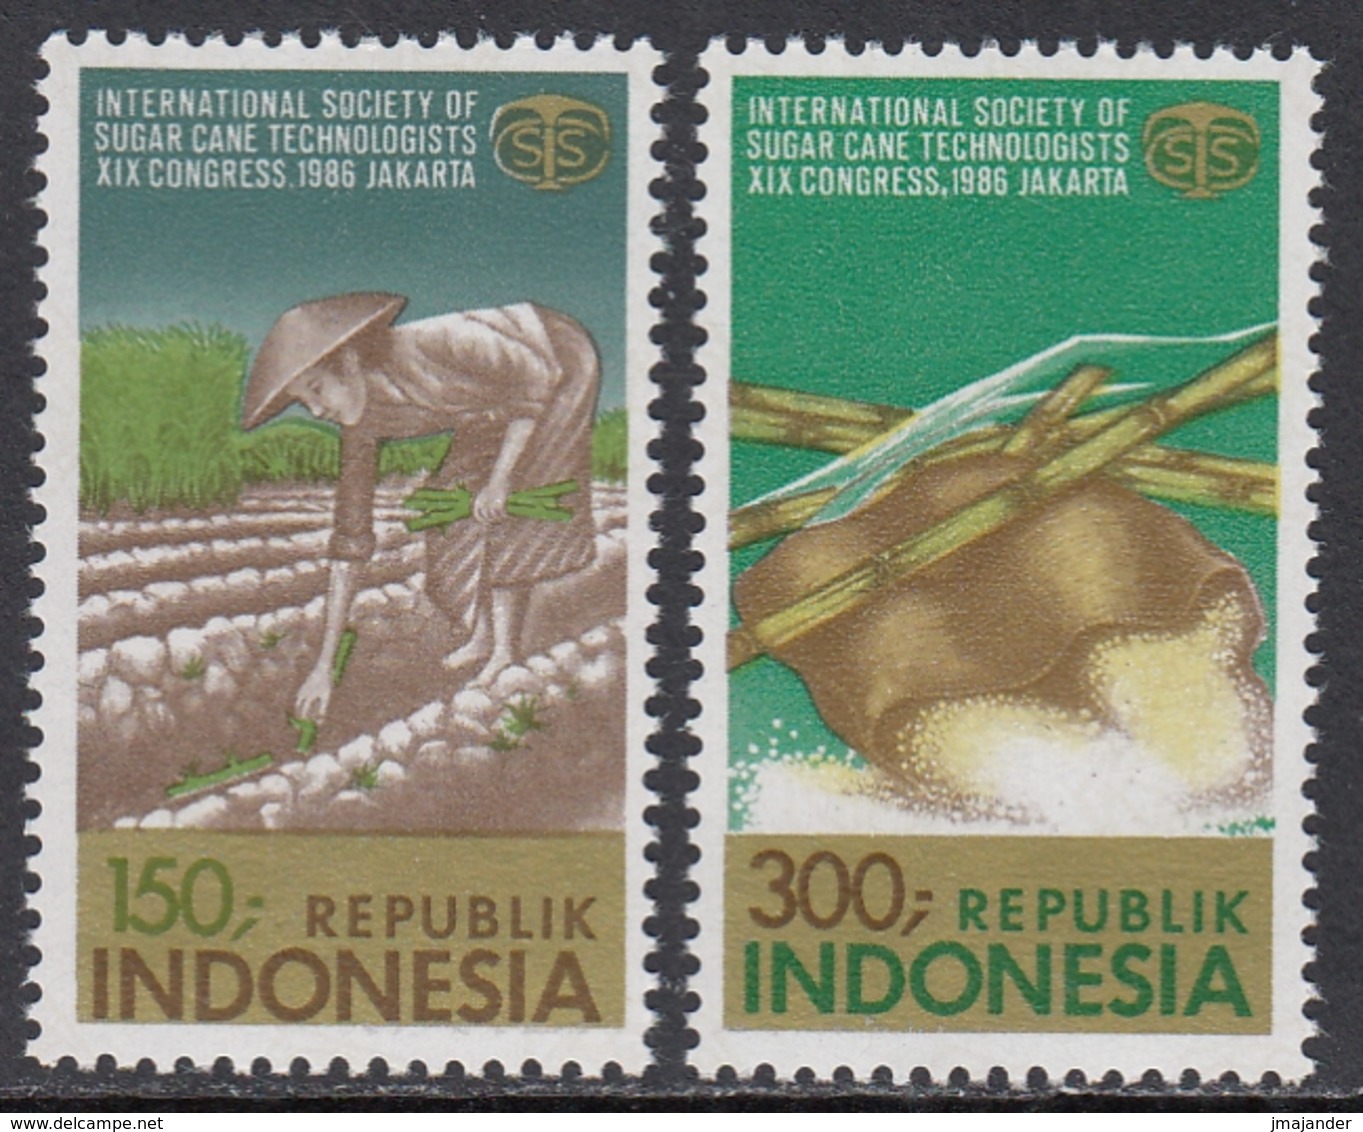 Indonesia 1986 - The 19th International Society Of Sugar Cane Technologists Congress - Mi 1208-1209 ** MNH - Indonesia